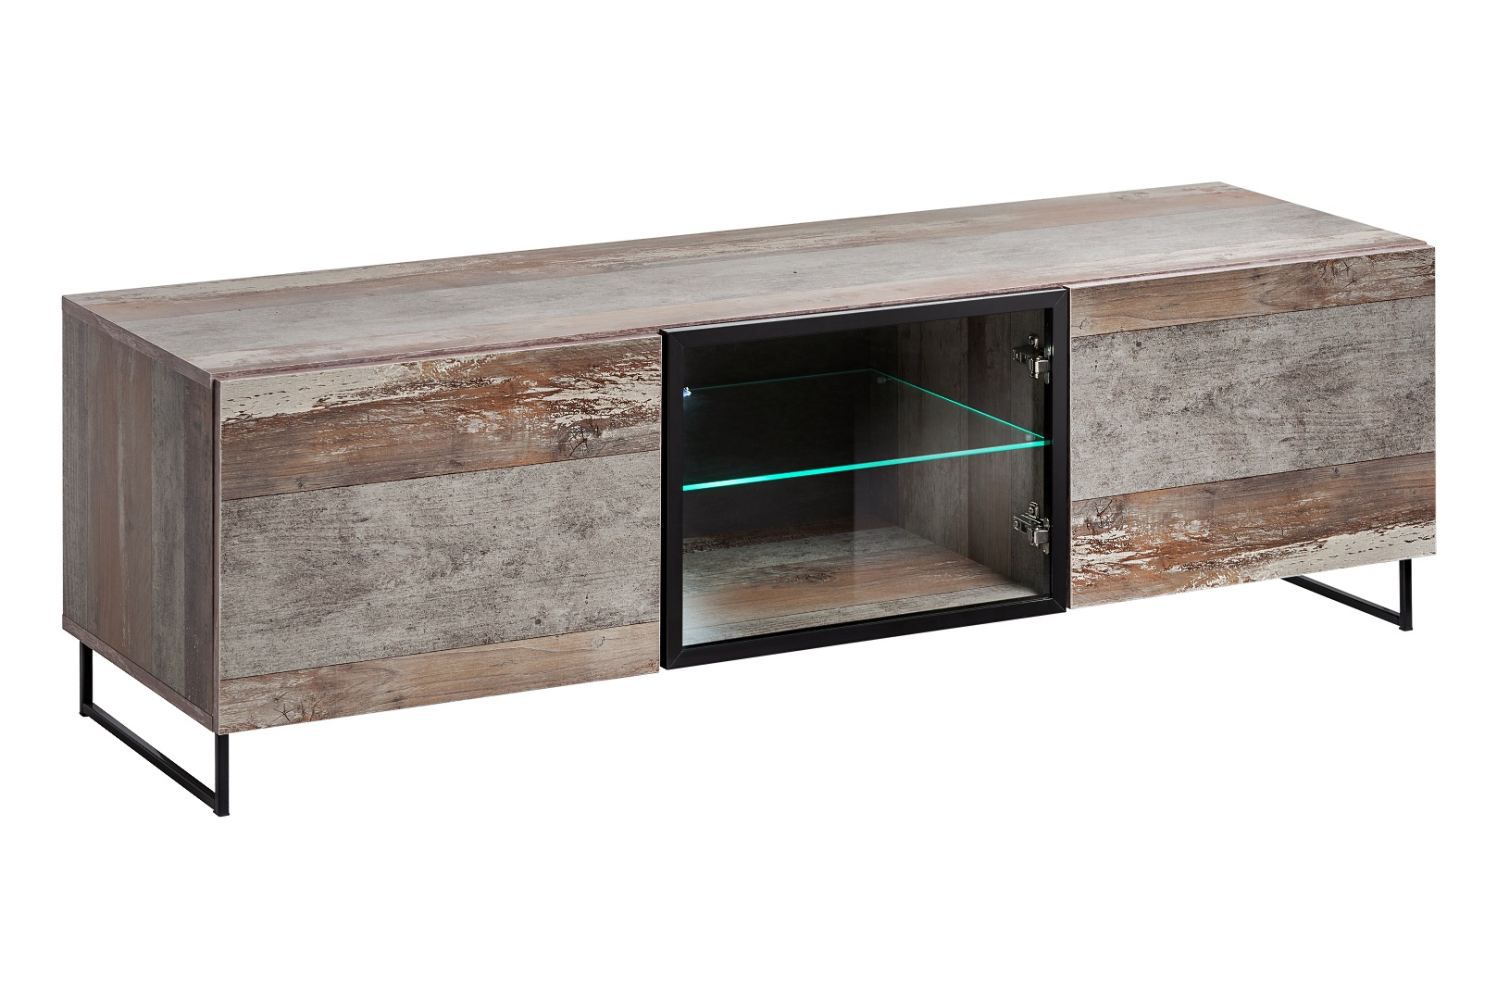 TV cabinet in rustic design Hundvin 04, color: oak canion / black - dimensions: 44 x 150 x 45 cm (H x W x D), with four compartments